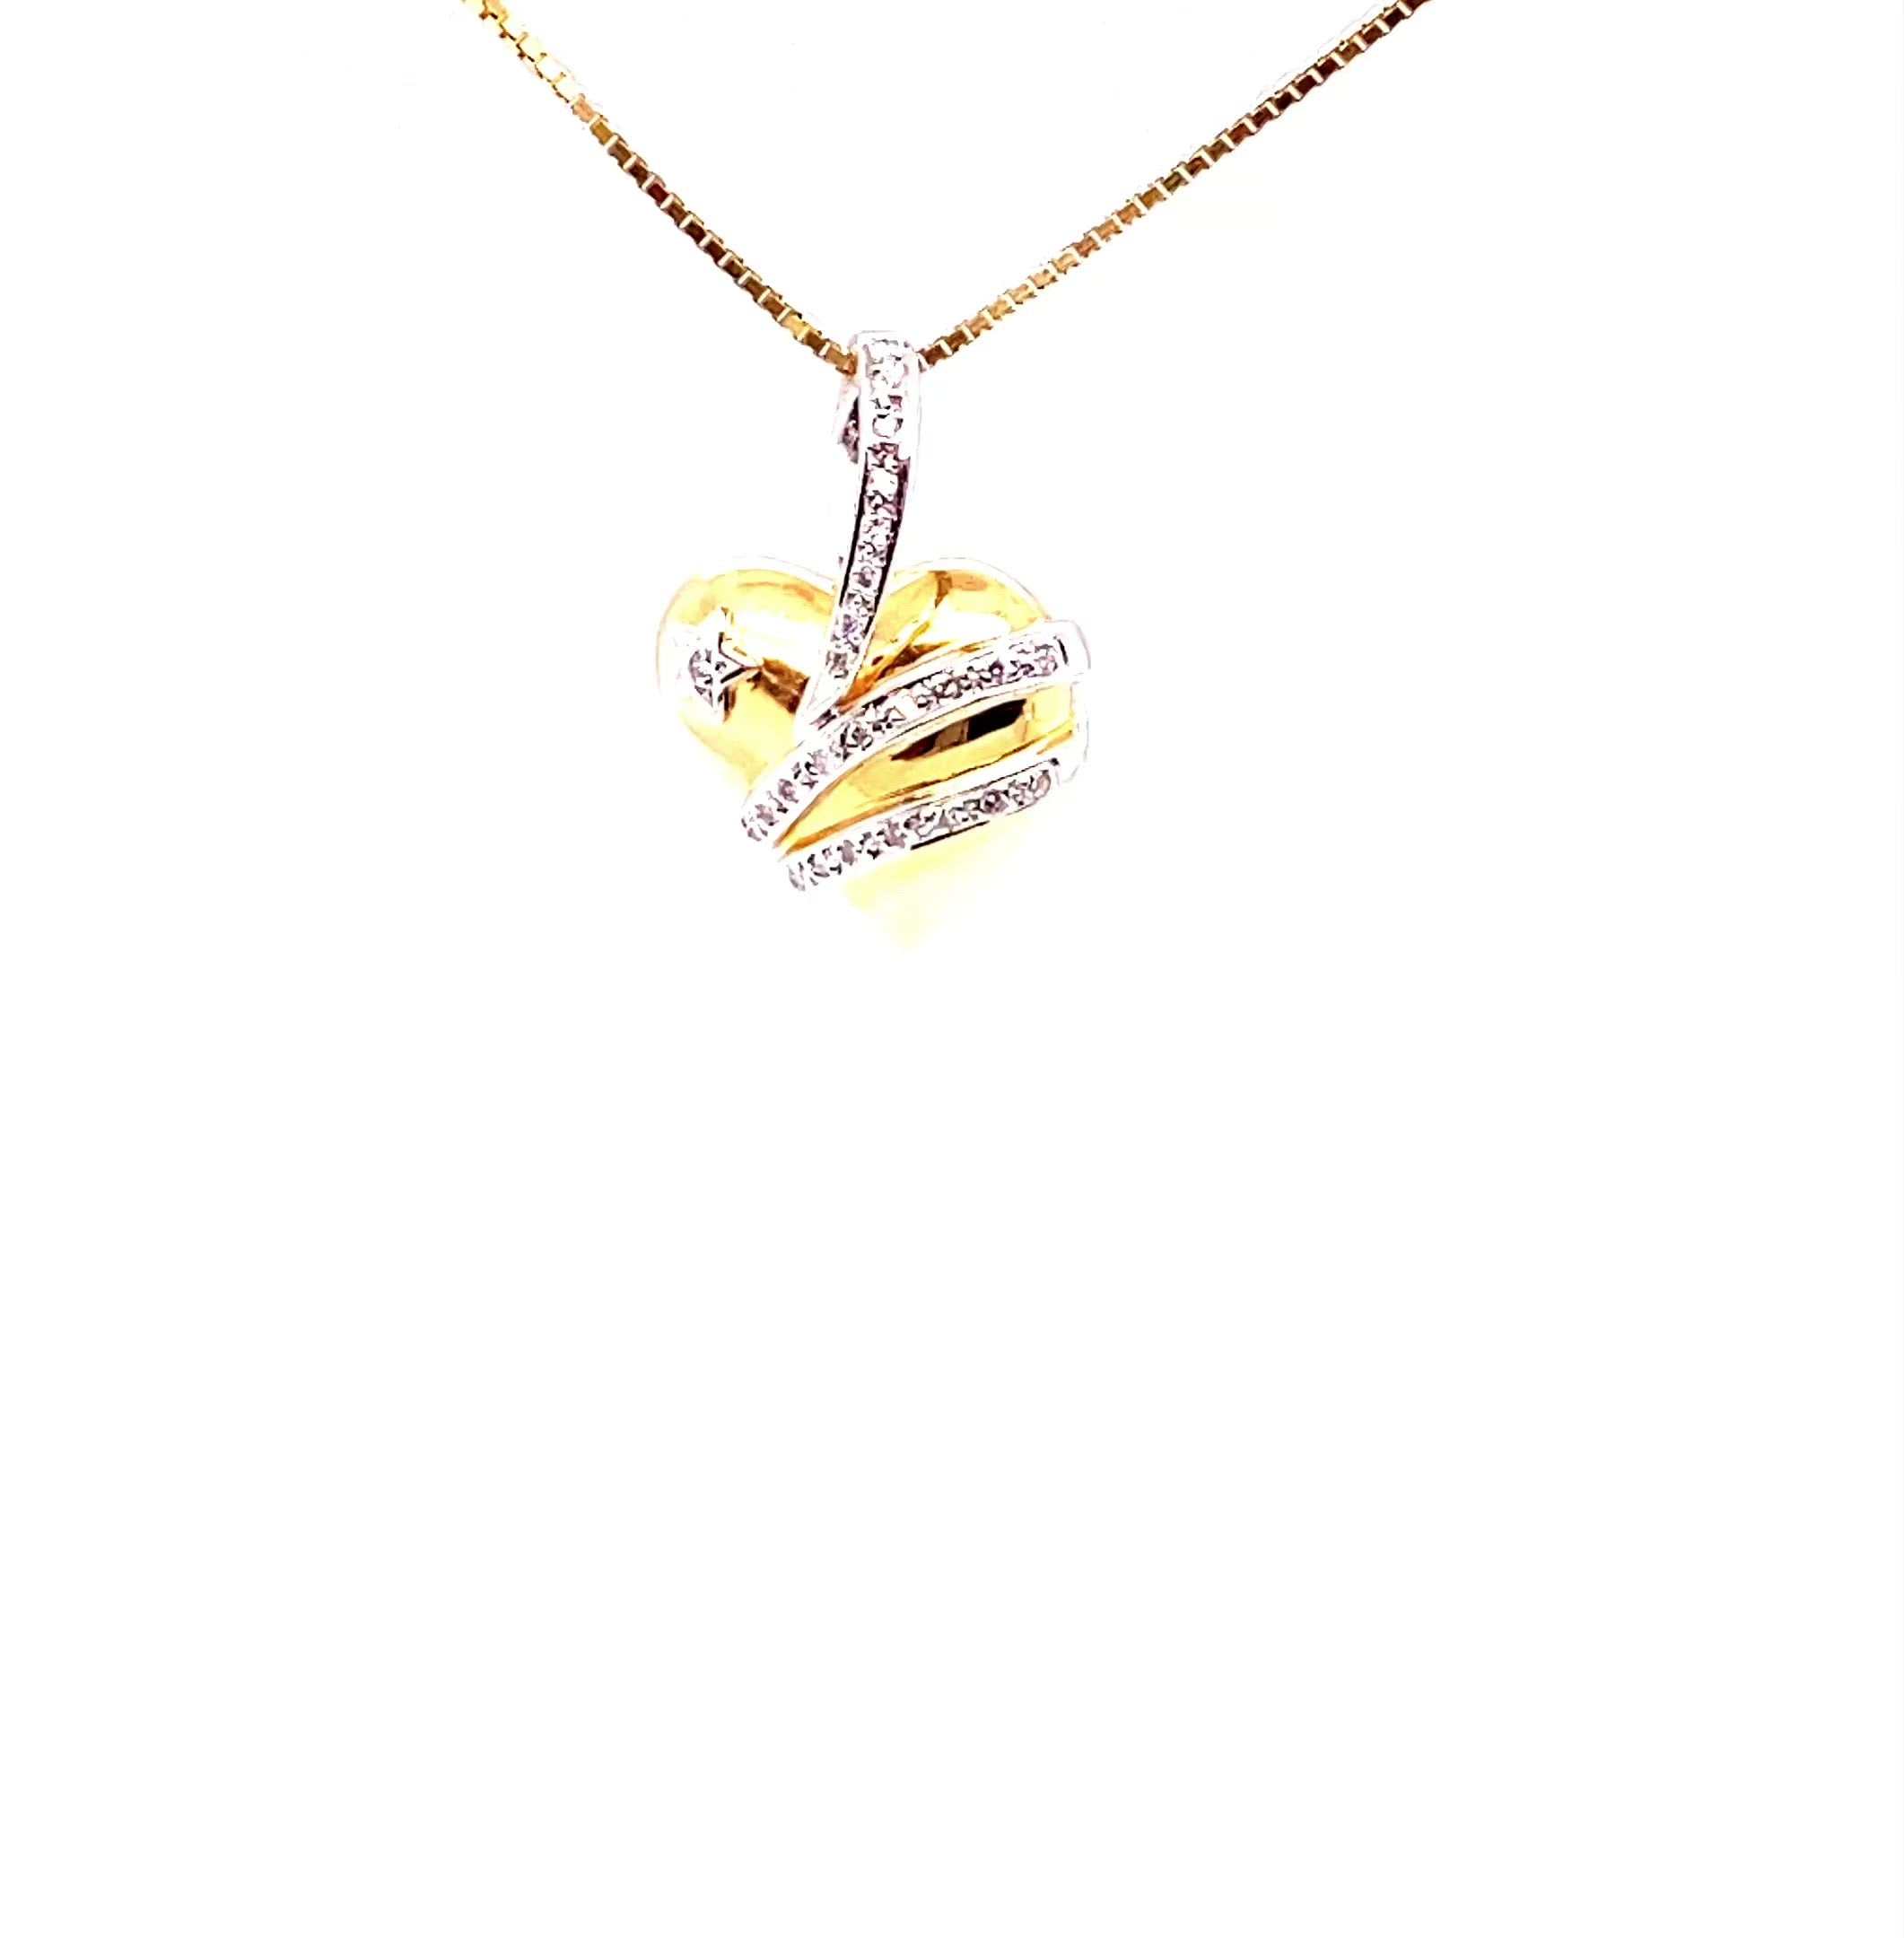 Natural Diamond Necklace 14K Solid Gold .24tcw Heart Necklace Pendant Necklace Heart Pendant Fine Necklace Heart Jewelry Women's Necklace